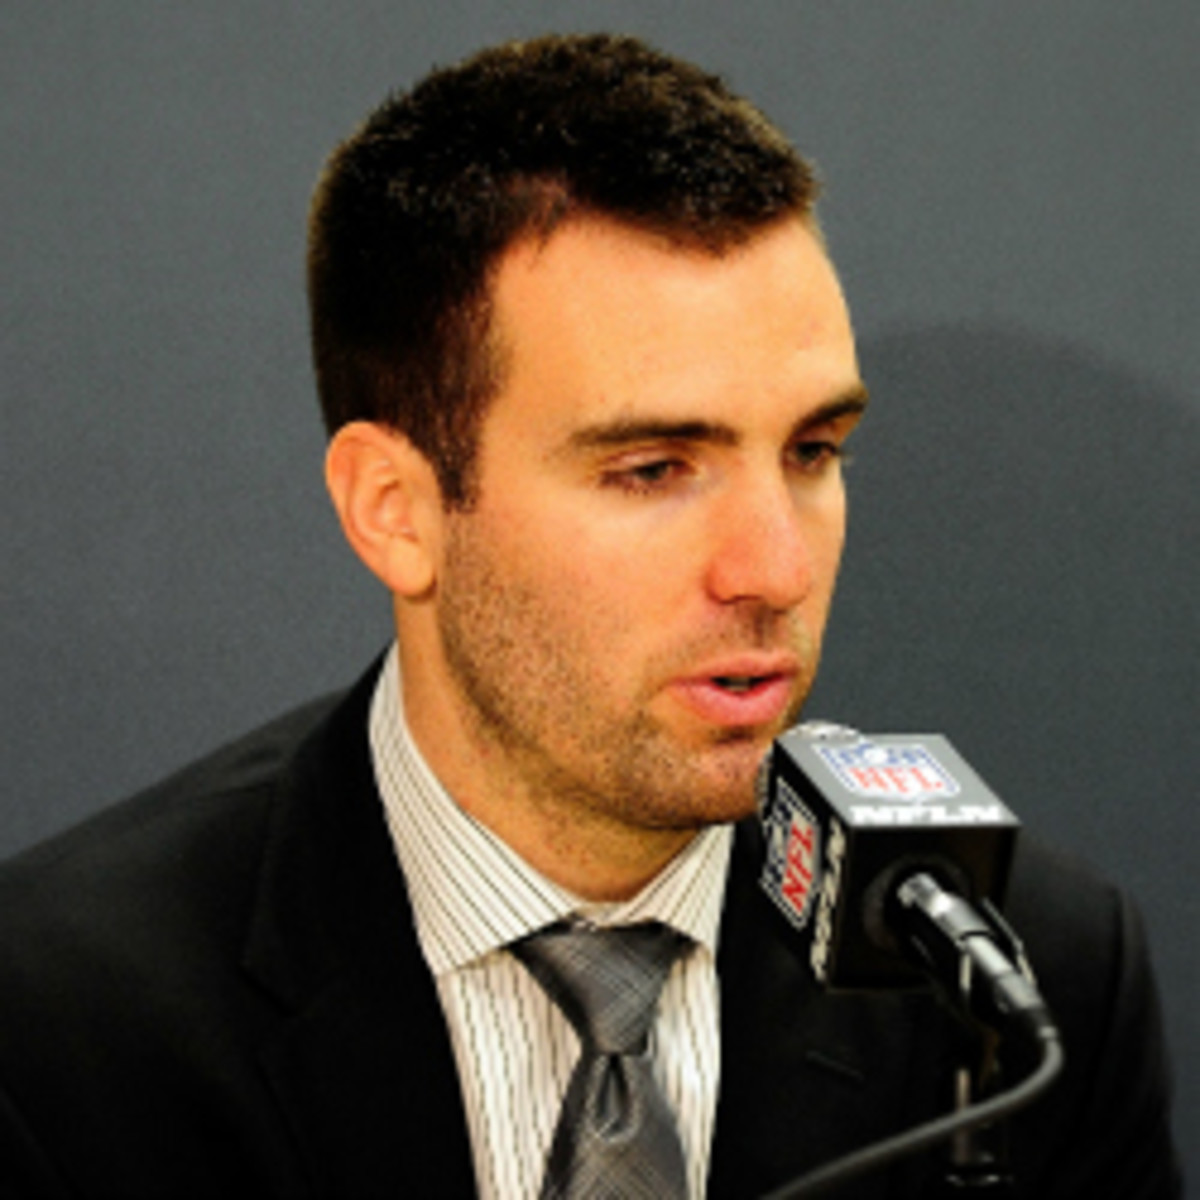 Joe Flacco lambasted the decision to hold next year's Super Bowl at MetLife Stadium. (Stacy Revere/Getty Images)